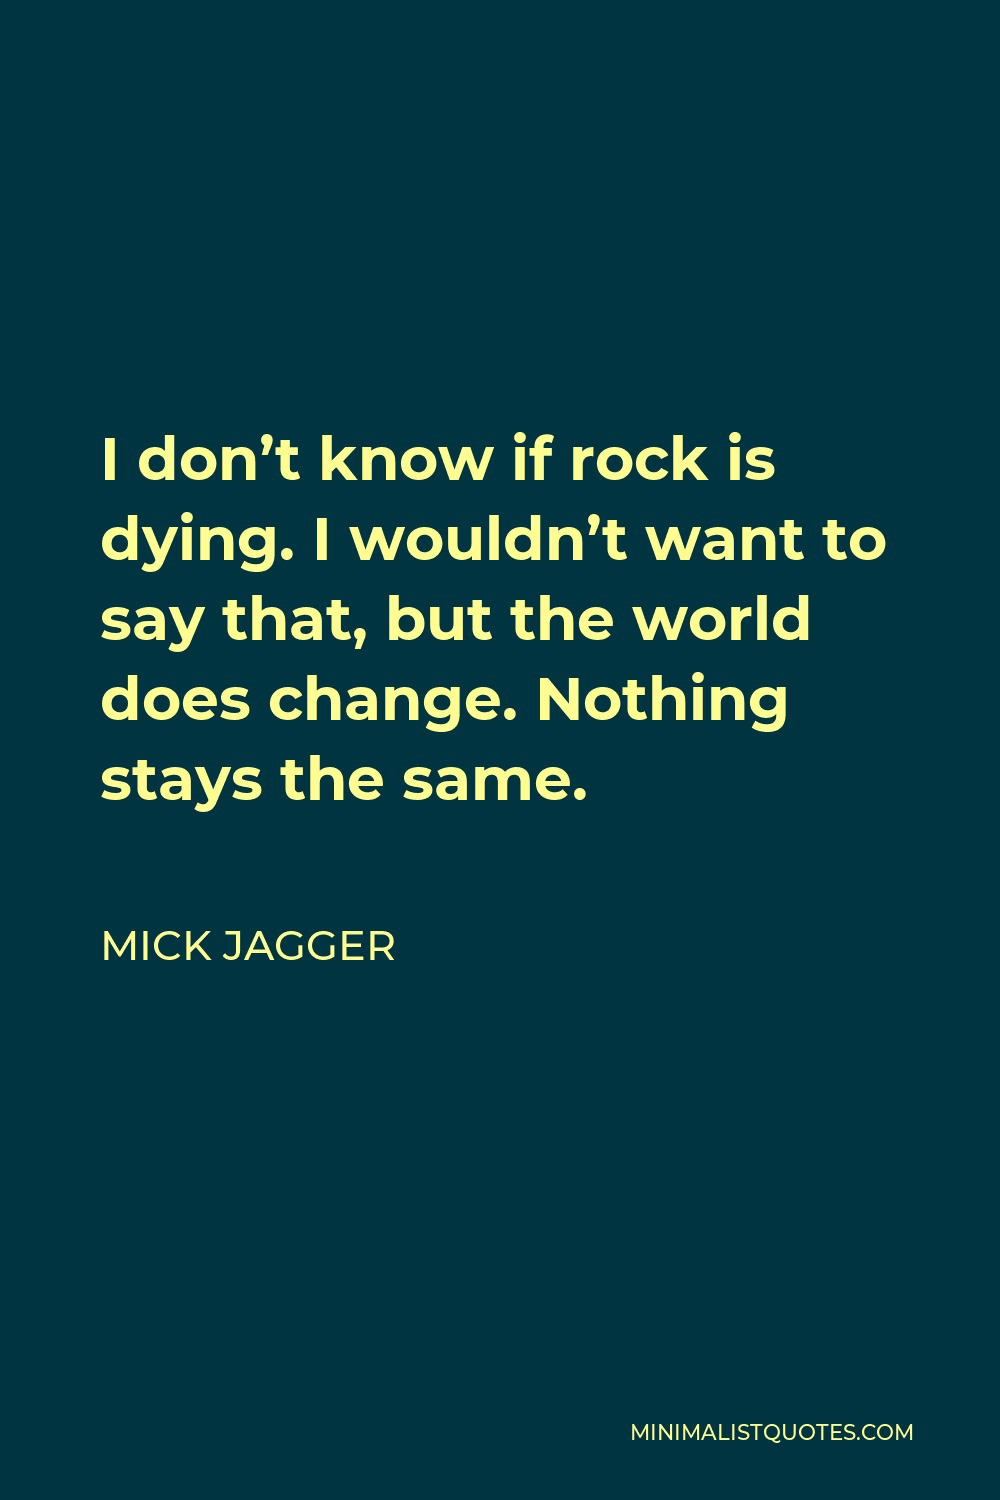 Mick Jagger Quote - I don’t know if rock is dying. I wouldn’t want to say that, but the world does change. Nothing stays the same.